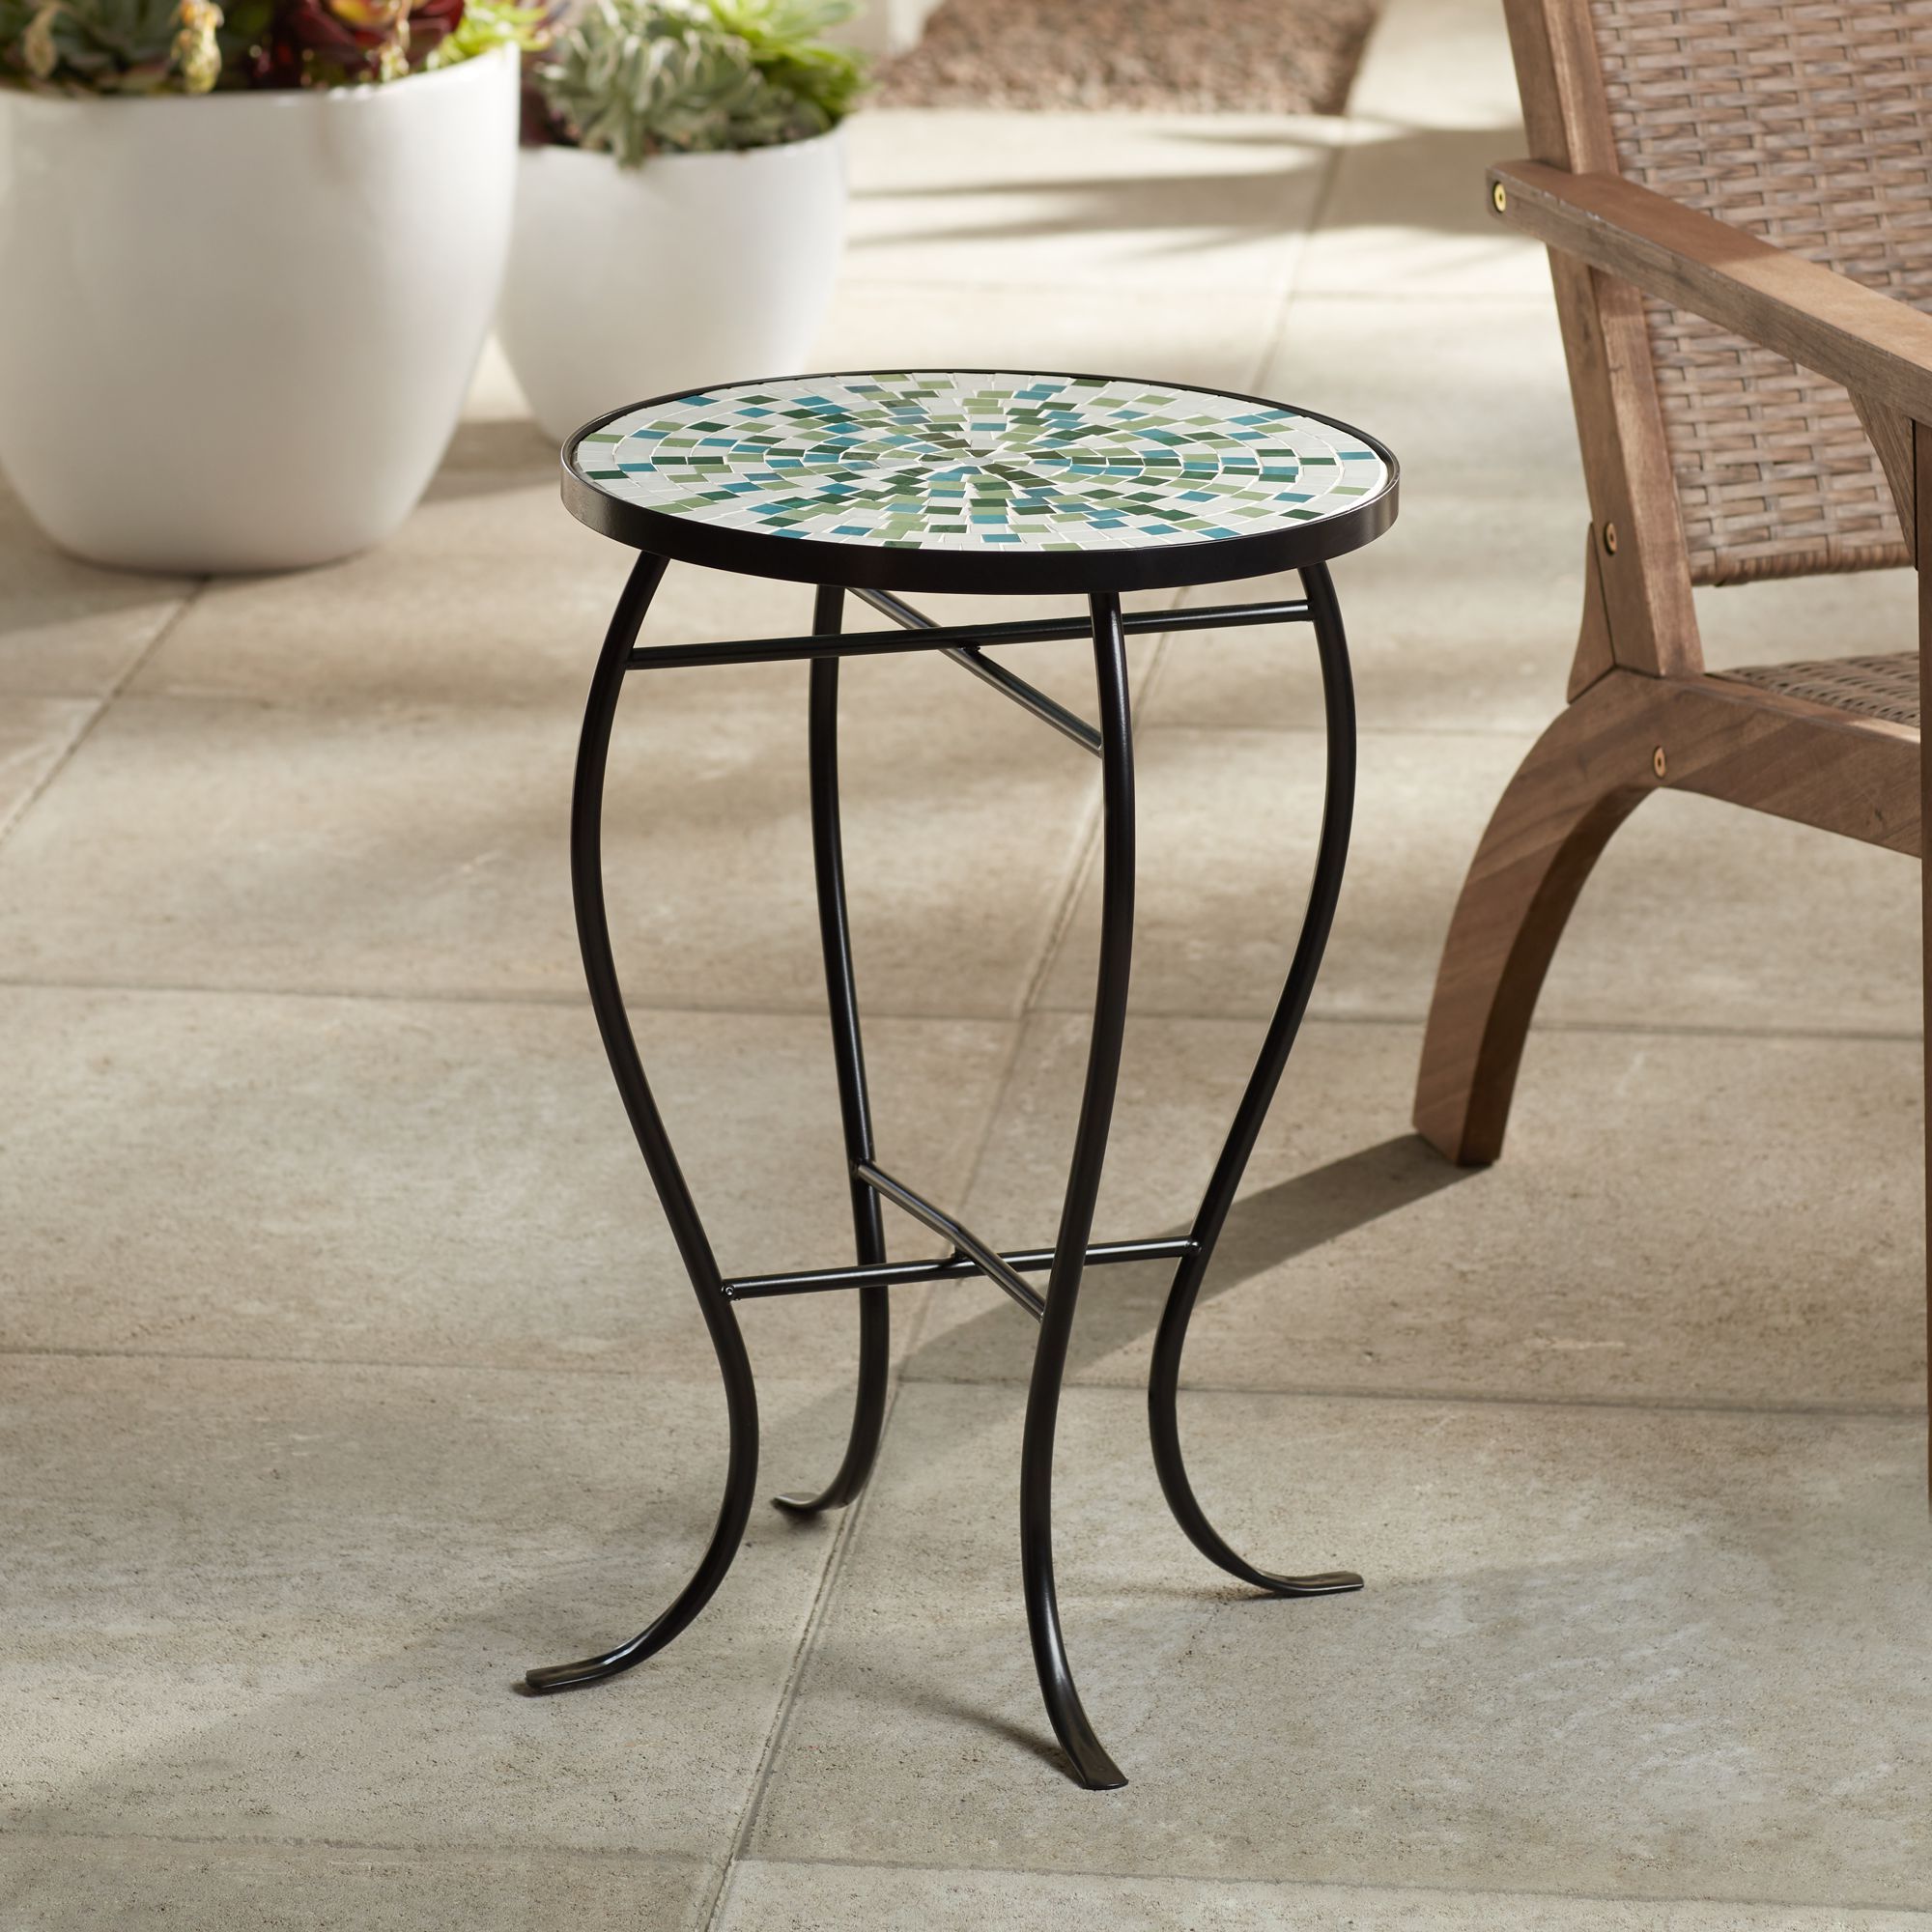 Best And Newest Teal Island Designs Aqua Mosaic Black Iron Outdoor Accent Table Inside Mosaic Black Outdoor Accent Tables (View 7 of 15)